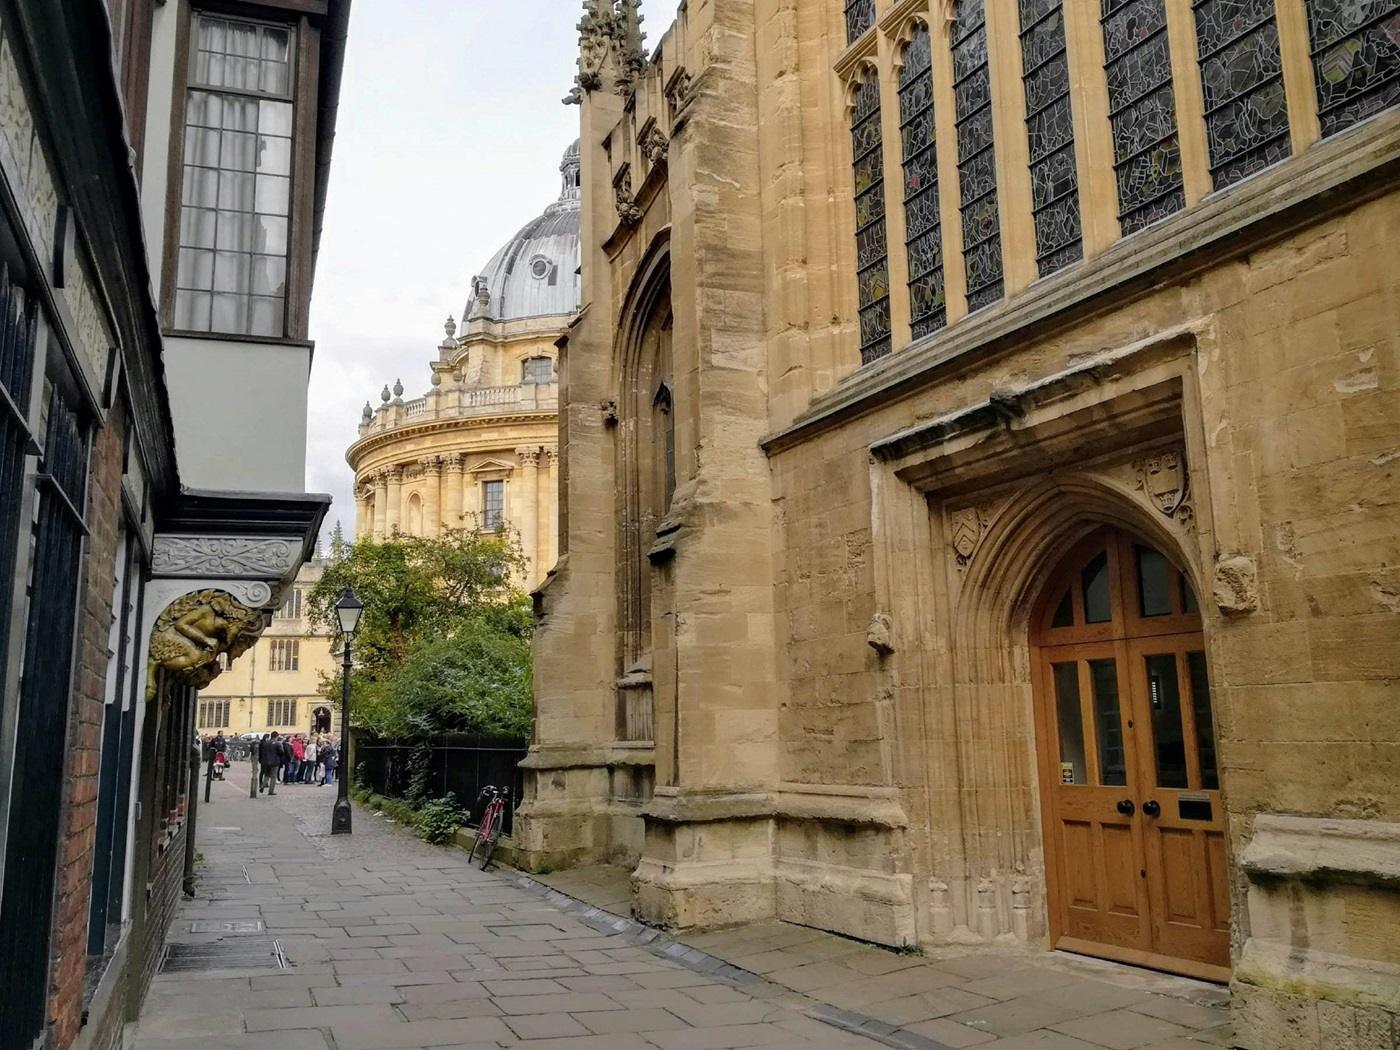 17km Oxford Run Route: St. Mary’s Passage, Queen’s College